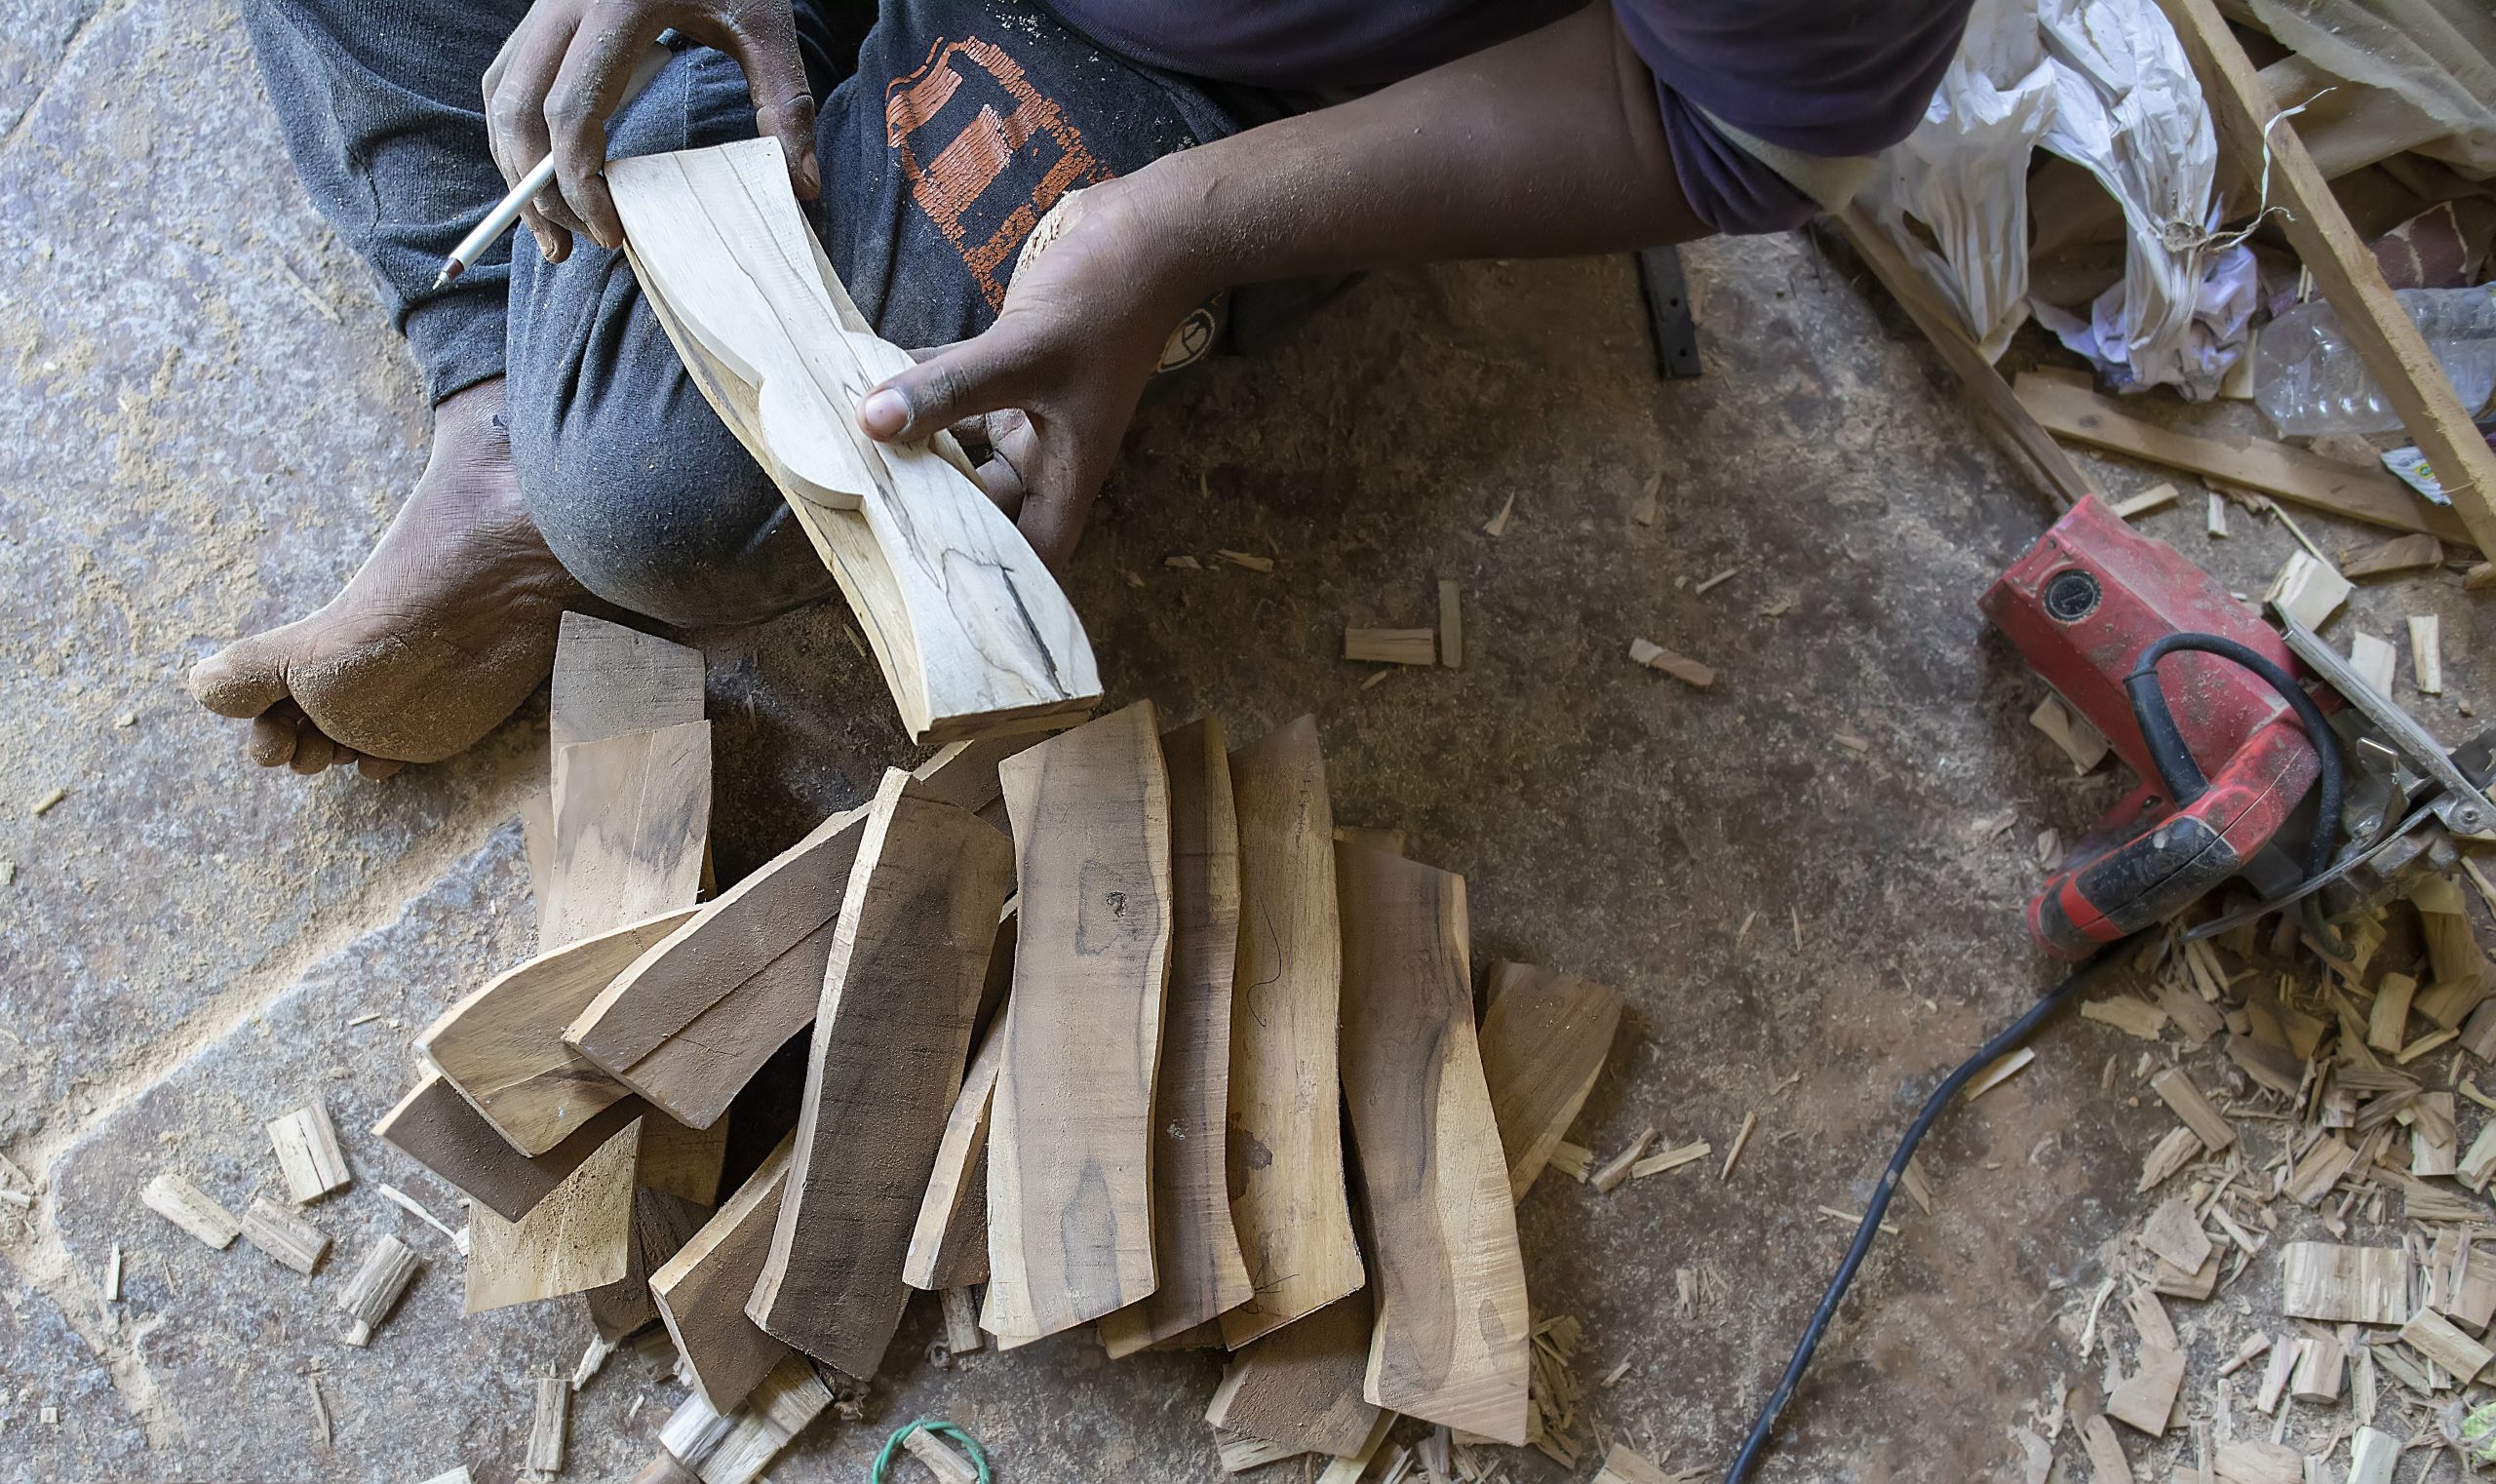 A carpenter working on wooden pieces